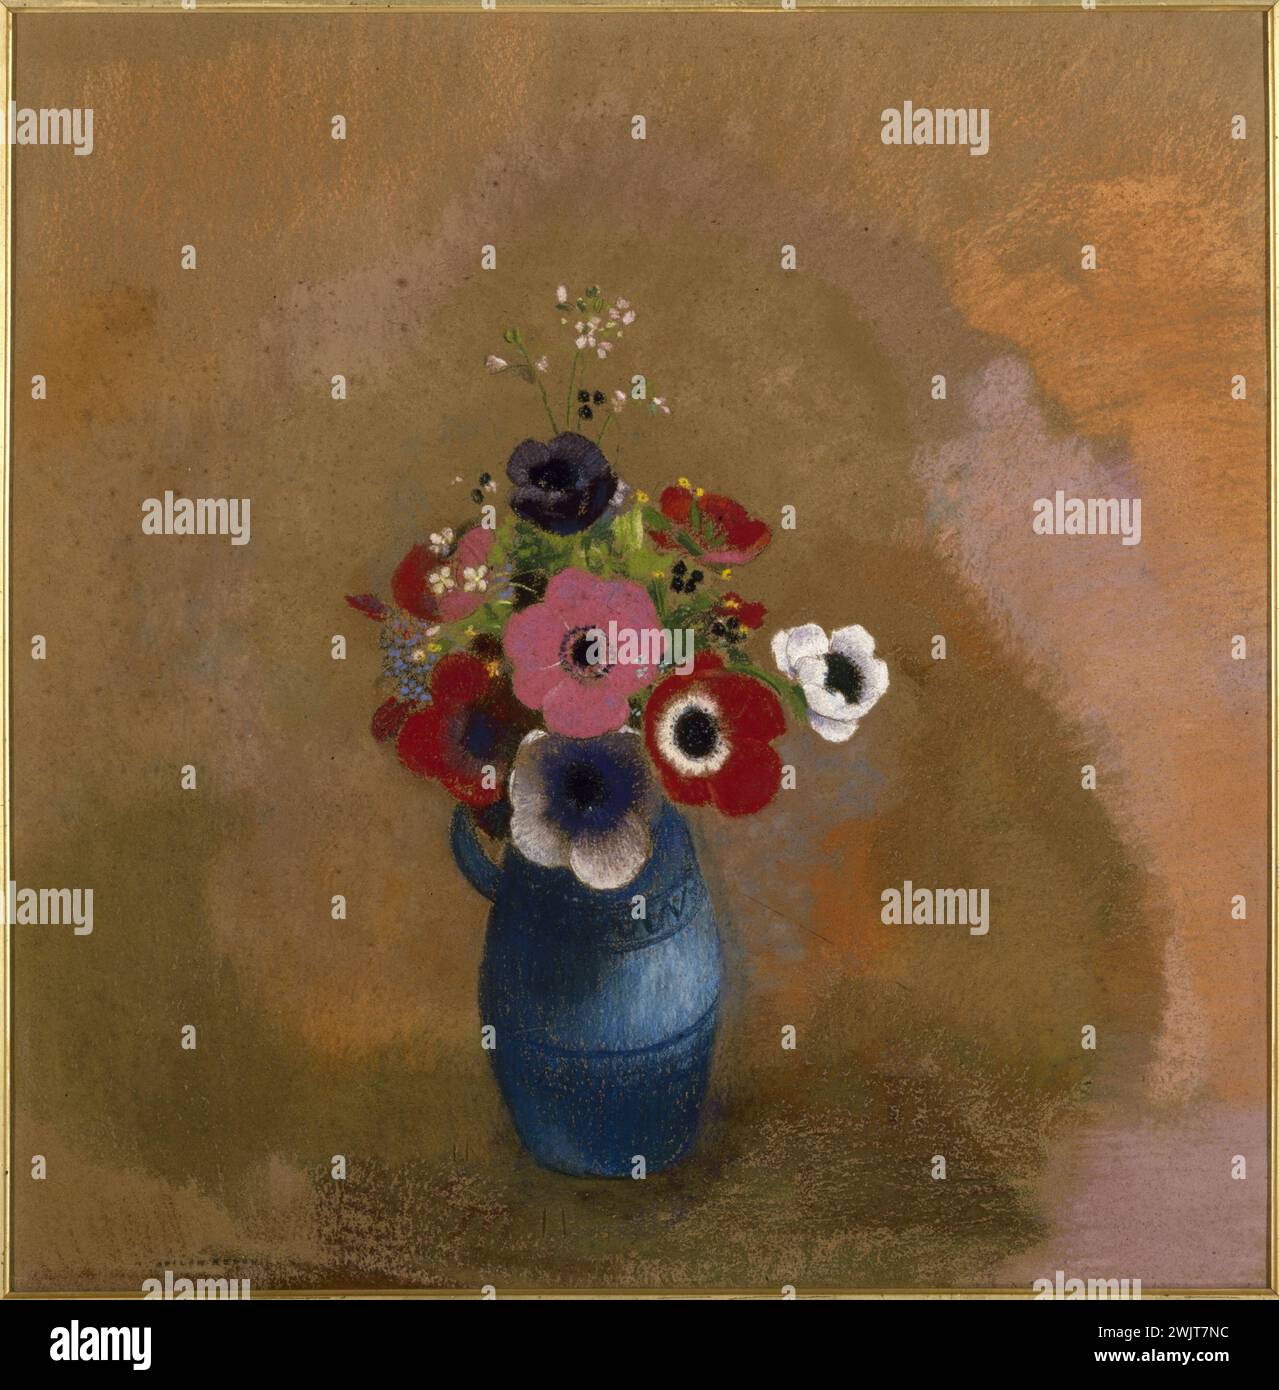 Odilon Redon (1840-1916). 'Anemones in a blue vase'. Pastel and black pencil lines on gray paper glued to cardboard, around 1912. Museum of Fine Arts in the city of Paris, Petit Palais. 52014-10 Anemone, flower, cardboard gray paper, pastel, black pencil line, blue vase Stock Photo